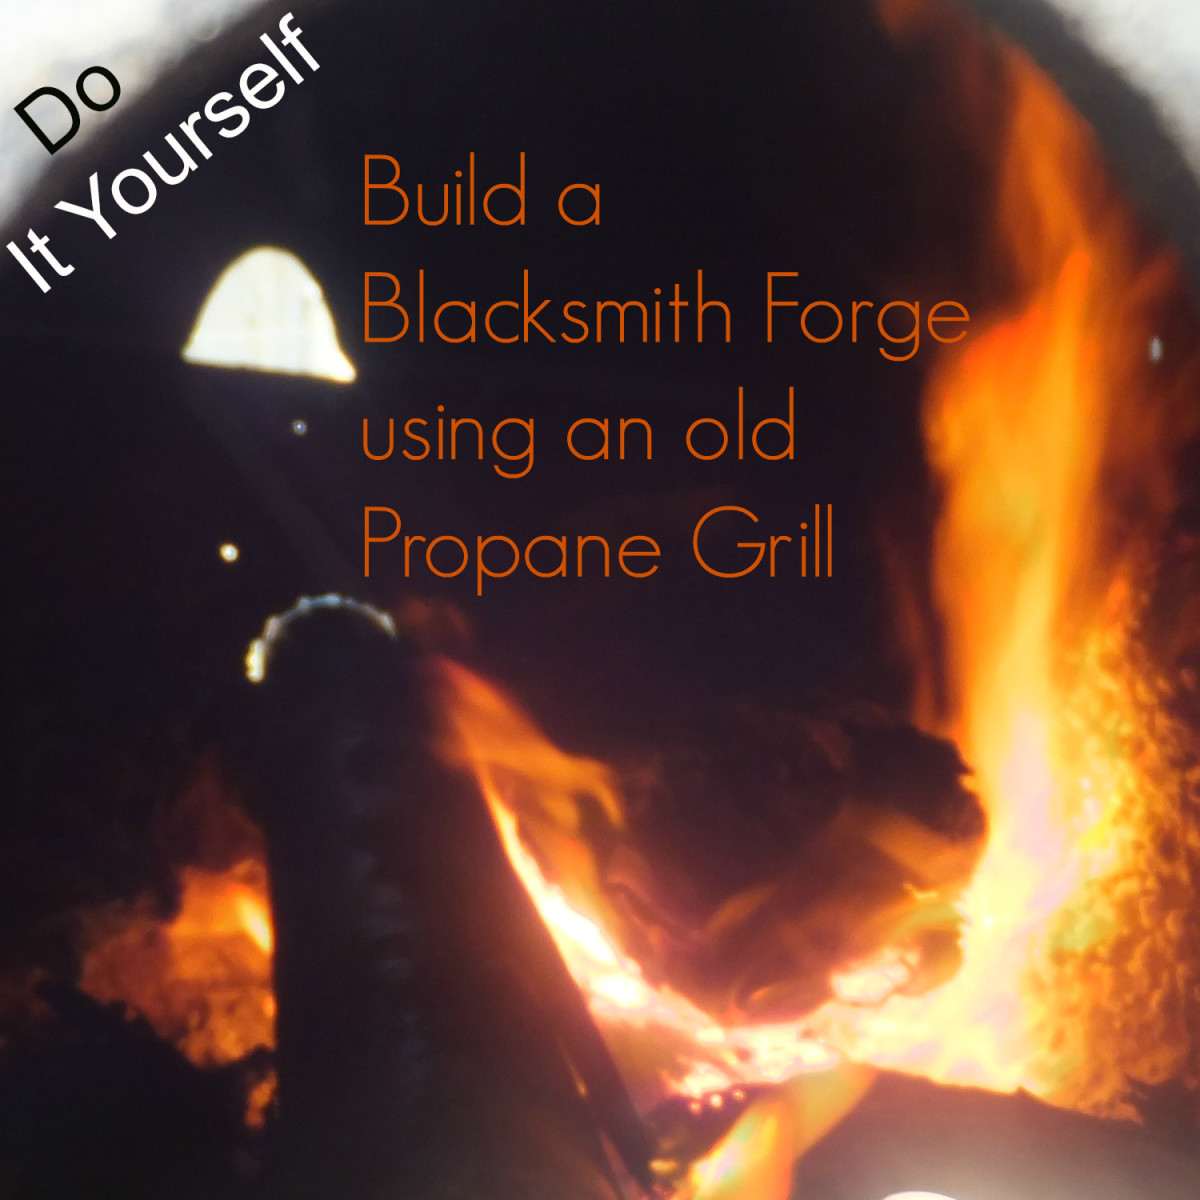 How to Make a Coal Blacksmith Forge From an Old Propane Grill